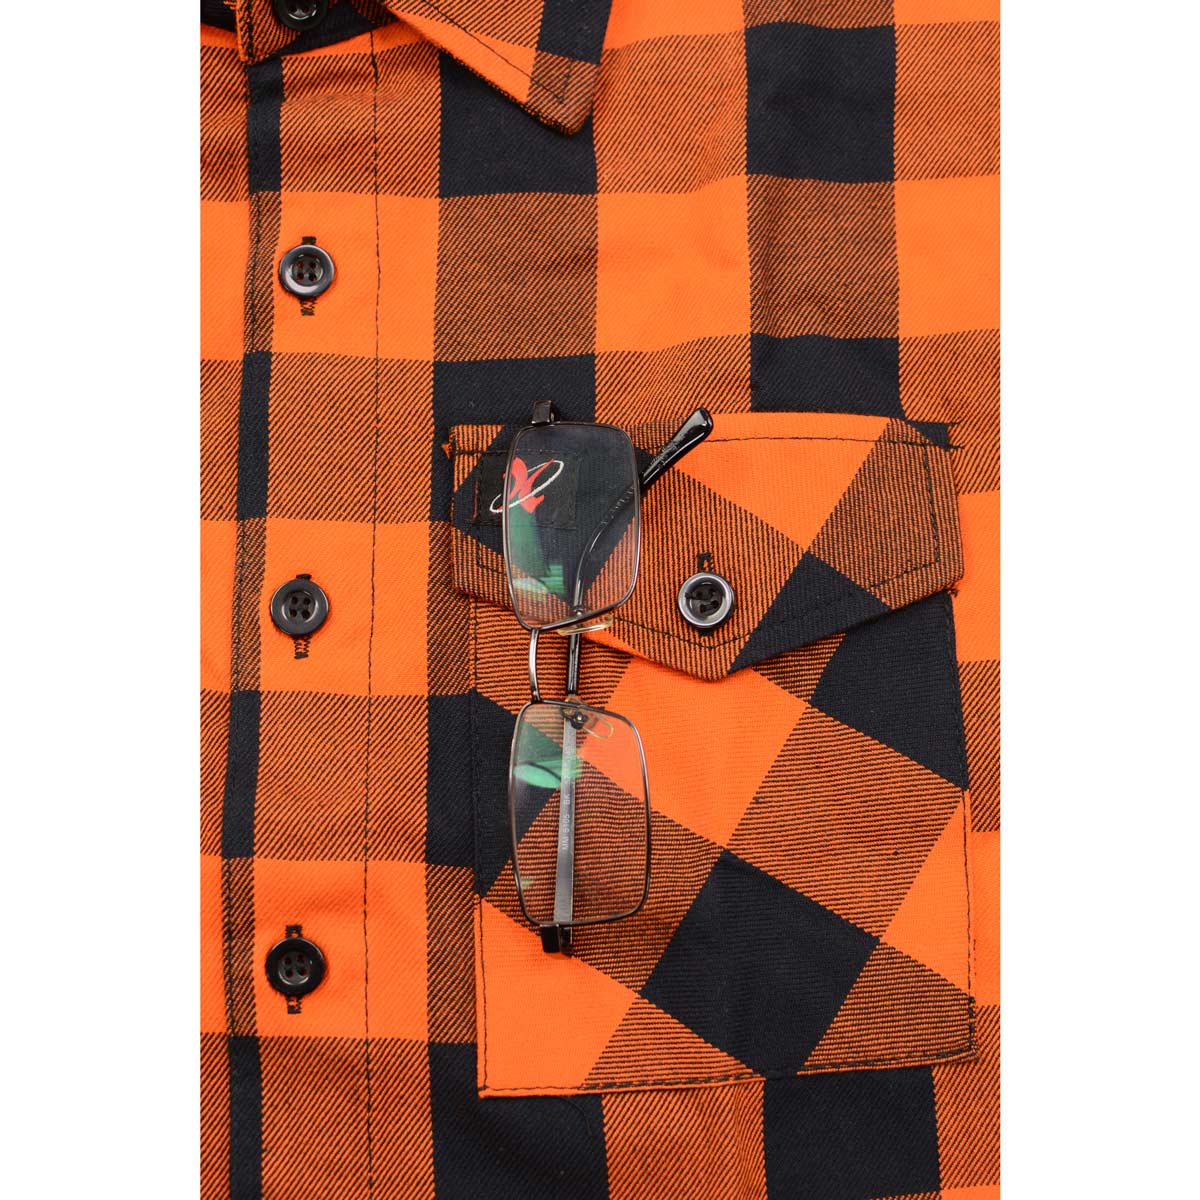 Milwaukee Leather Men's Flannel Plaid Shirt Orange and Black Long Sleeve Cotton Button Down with Hoodie MNG11642